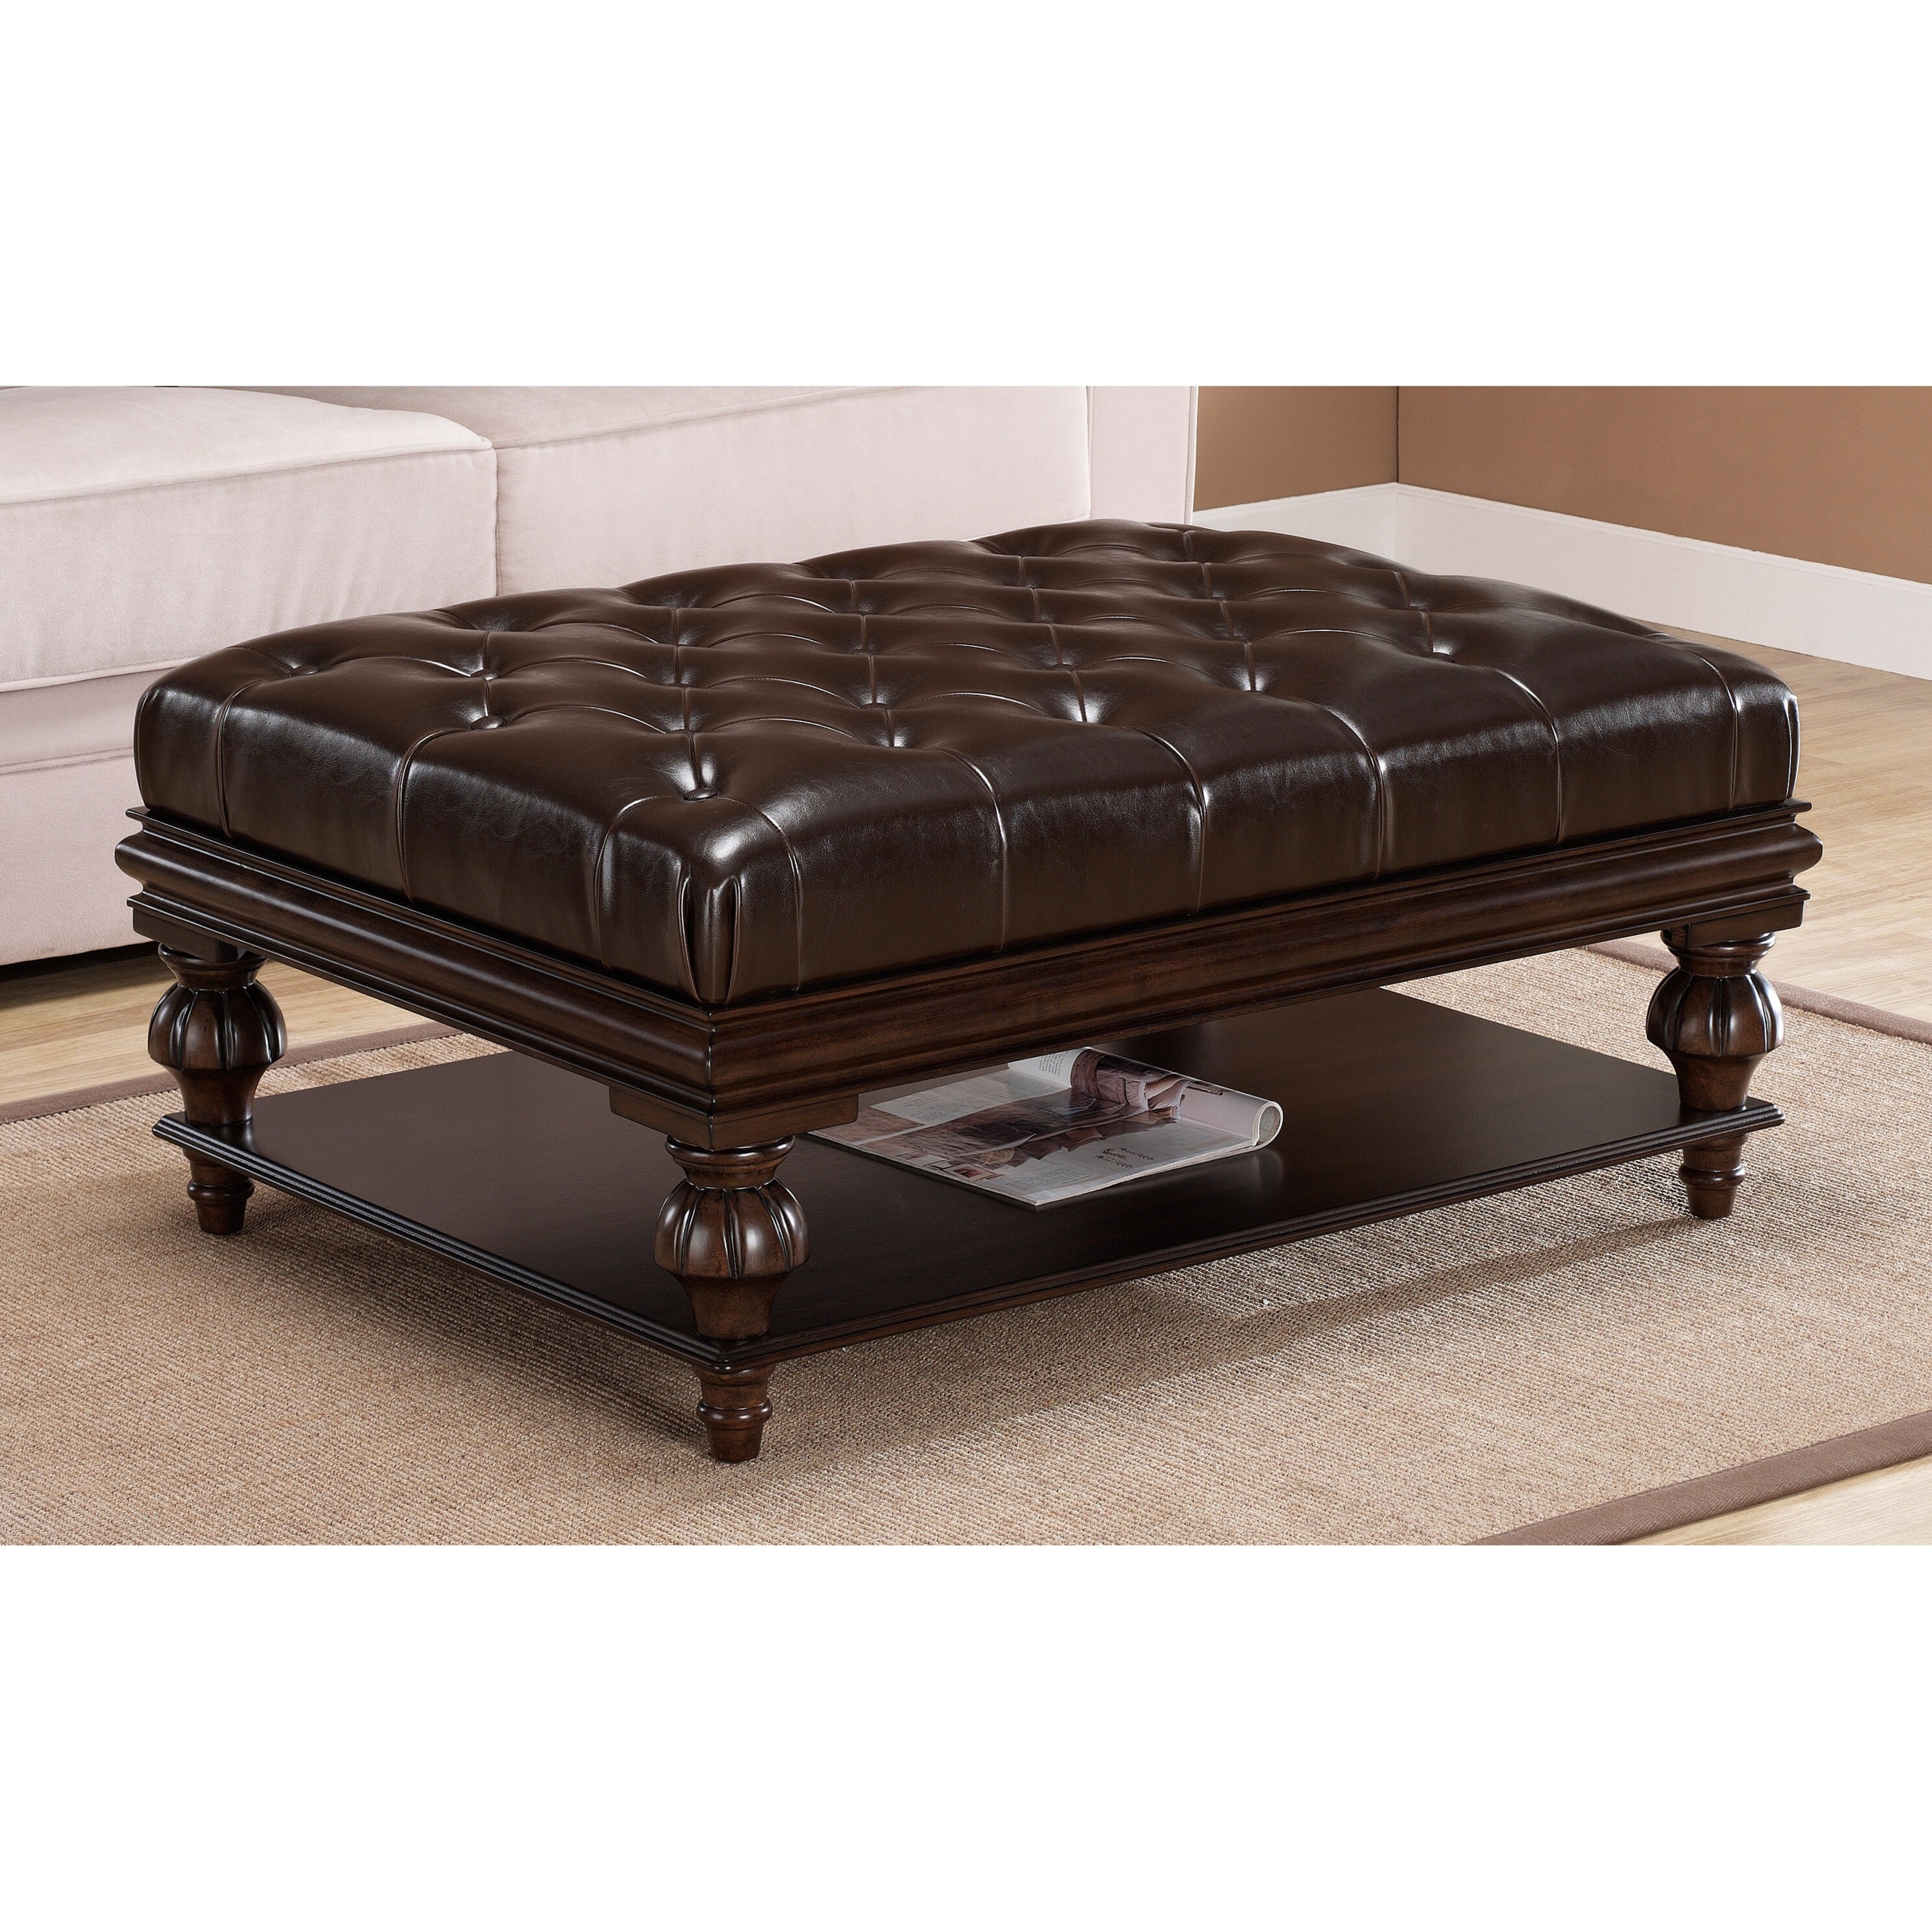 Tufted Leather Ottoman With Optional Shelf